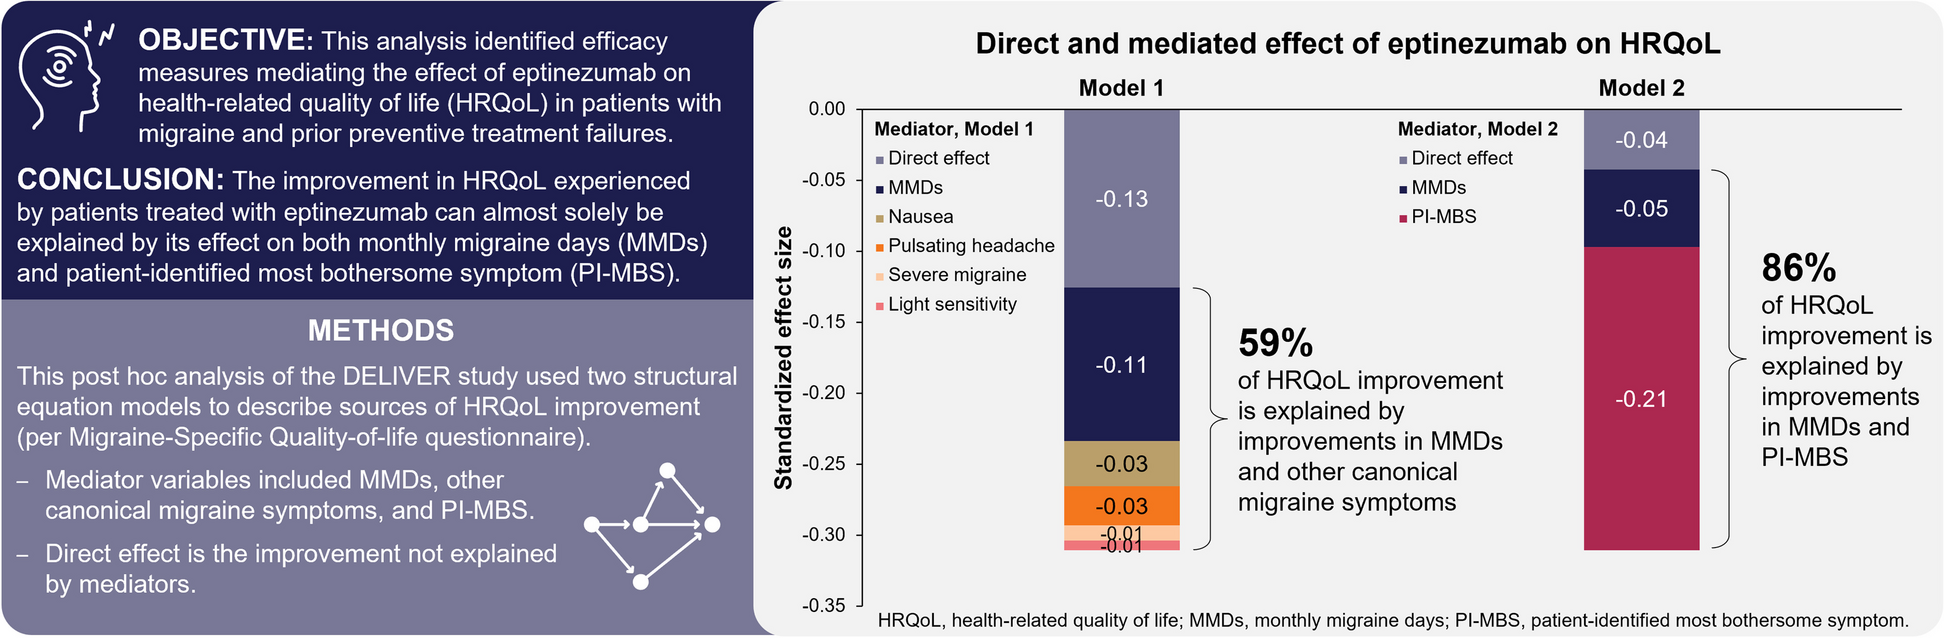 Structural equation modeling for identifying the drivers of health-related quality of life improvement experienced by patients with migraine receiving eptinezumab